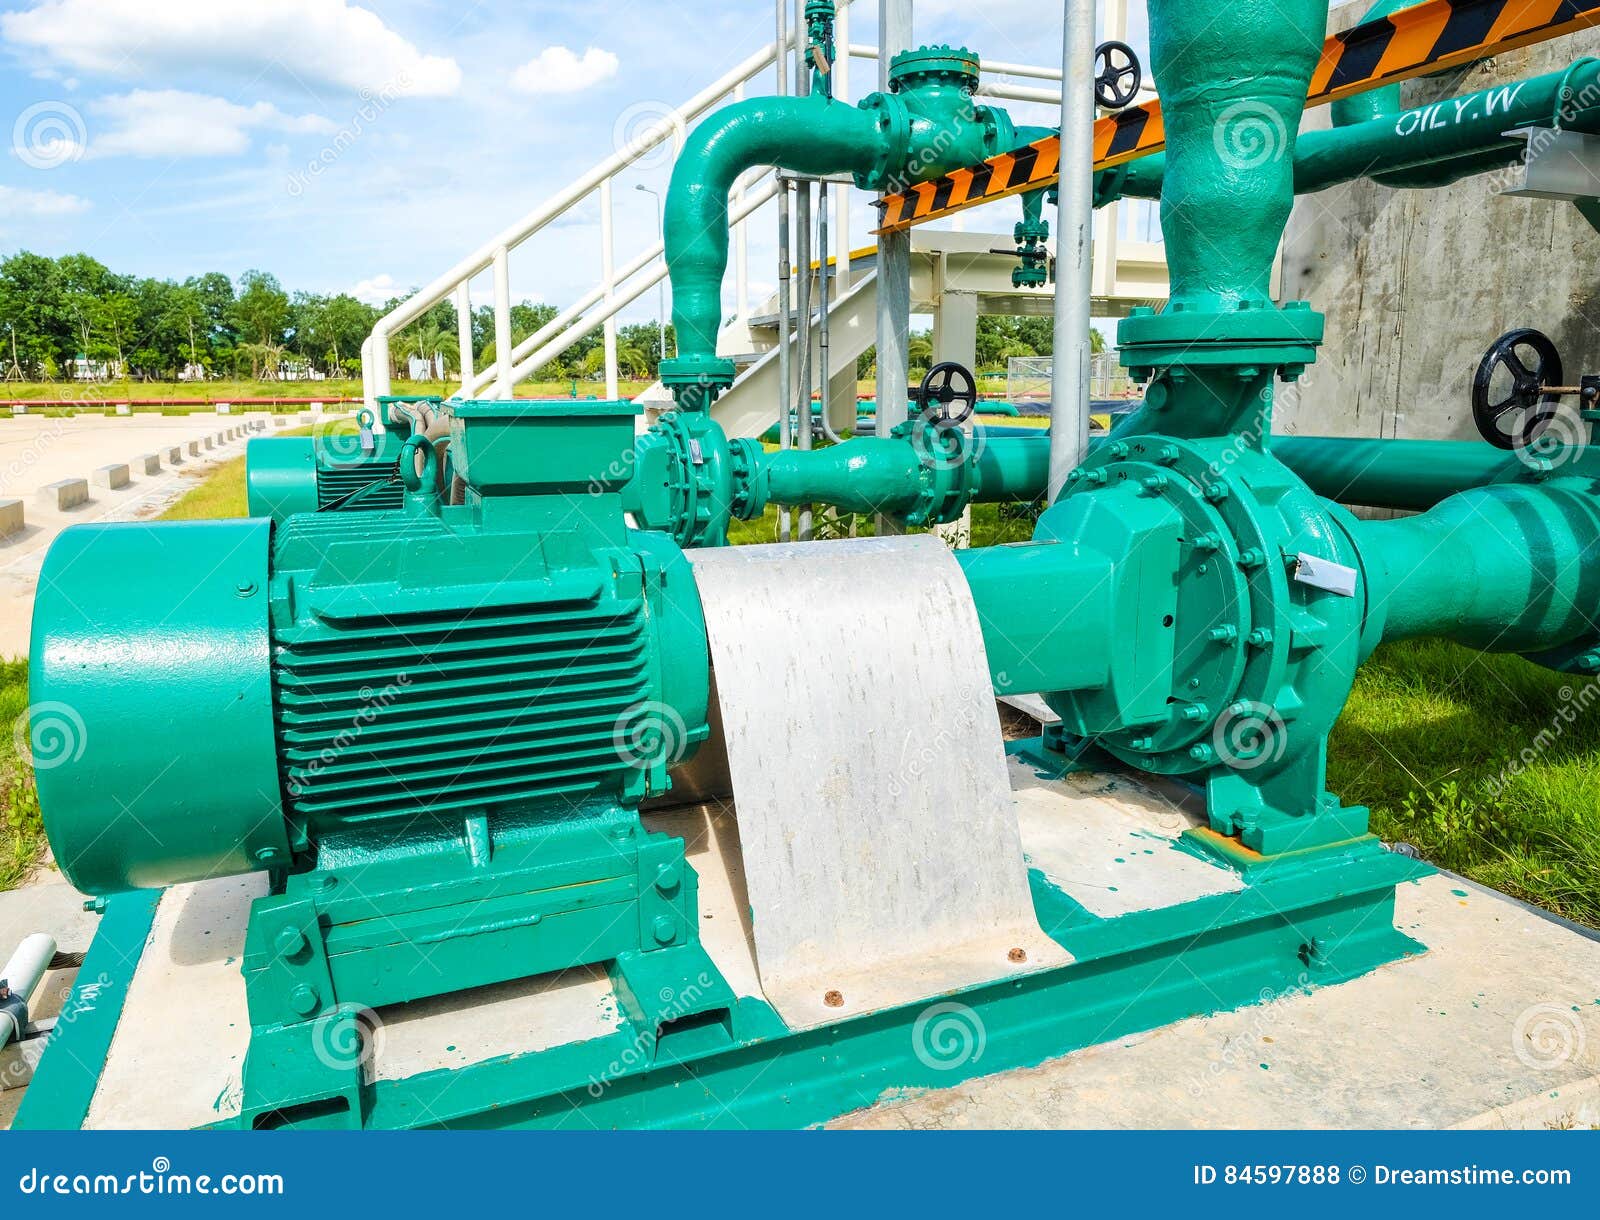 Centrifugal pump and motor stock photo. Image of - 84597888